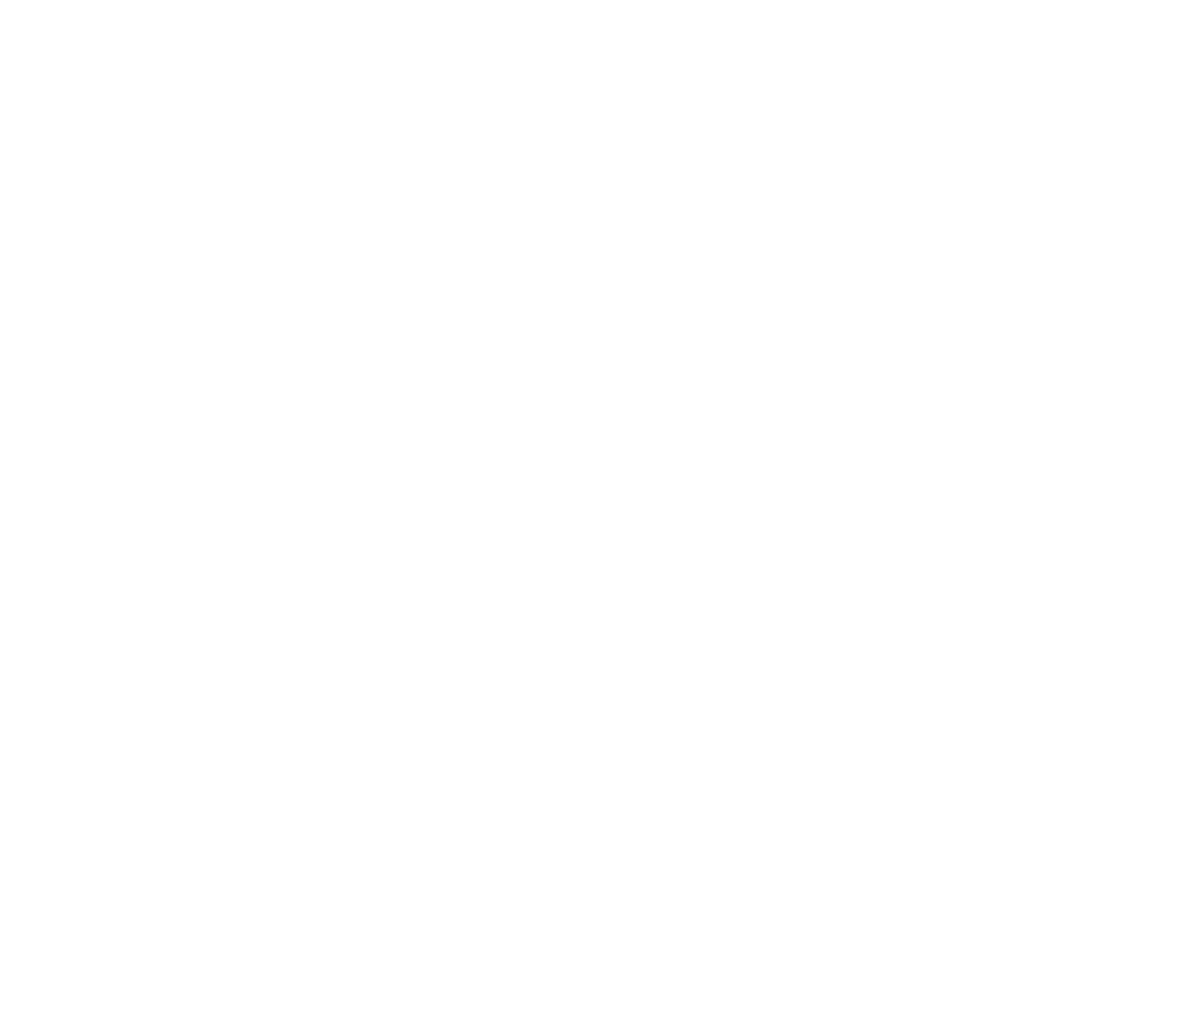 African American Archives - Self Made